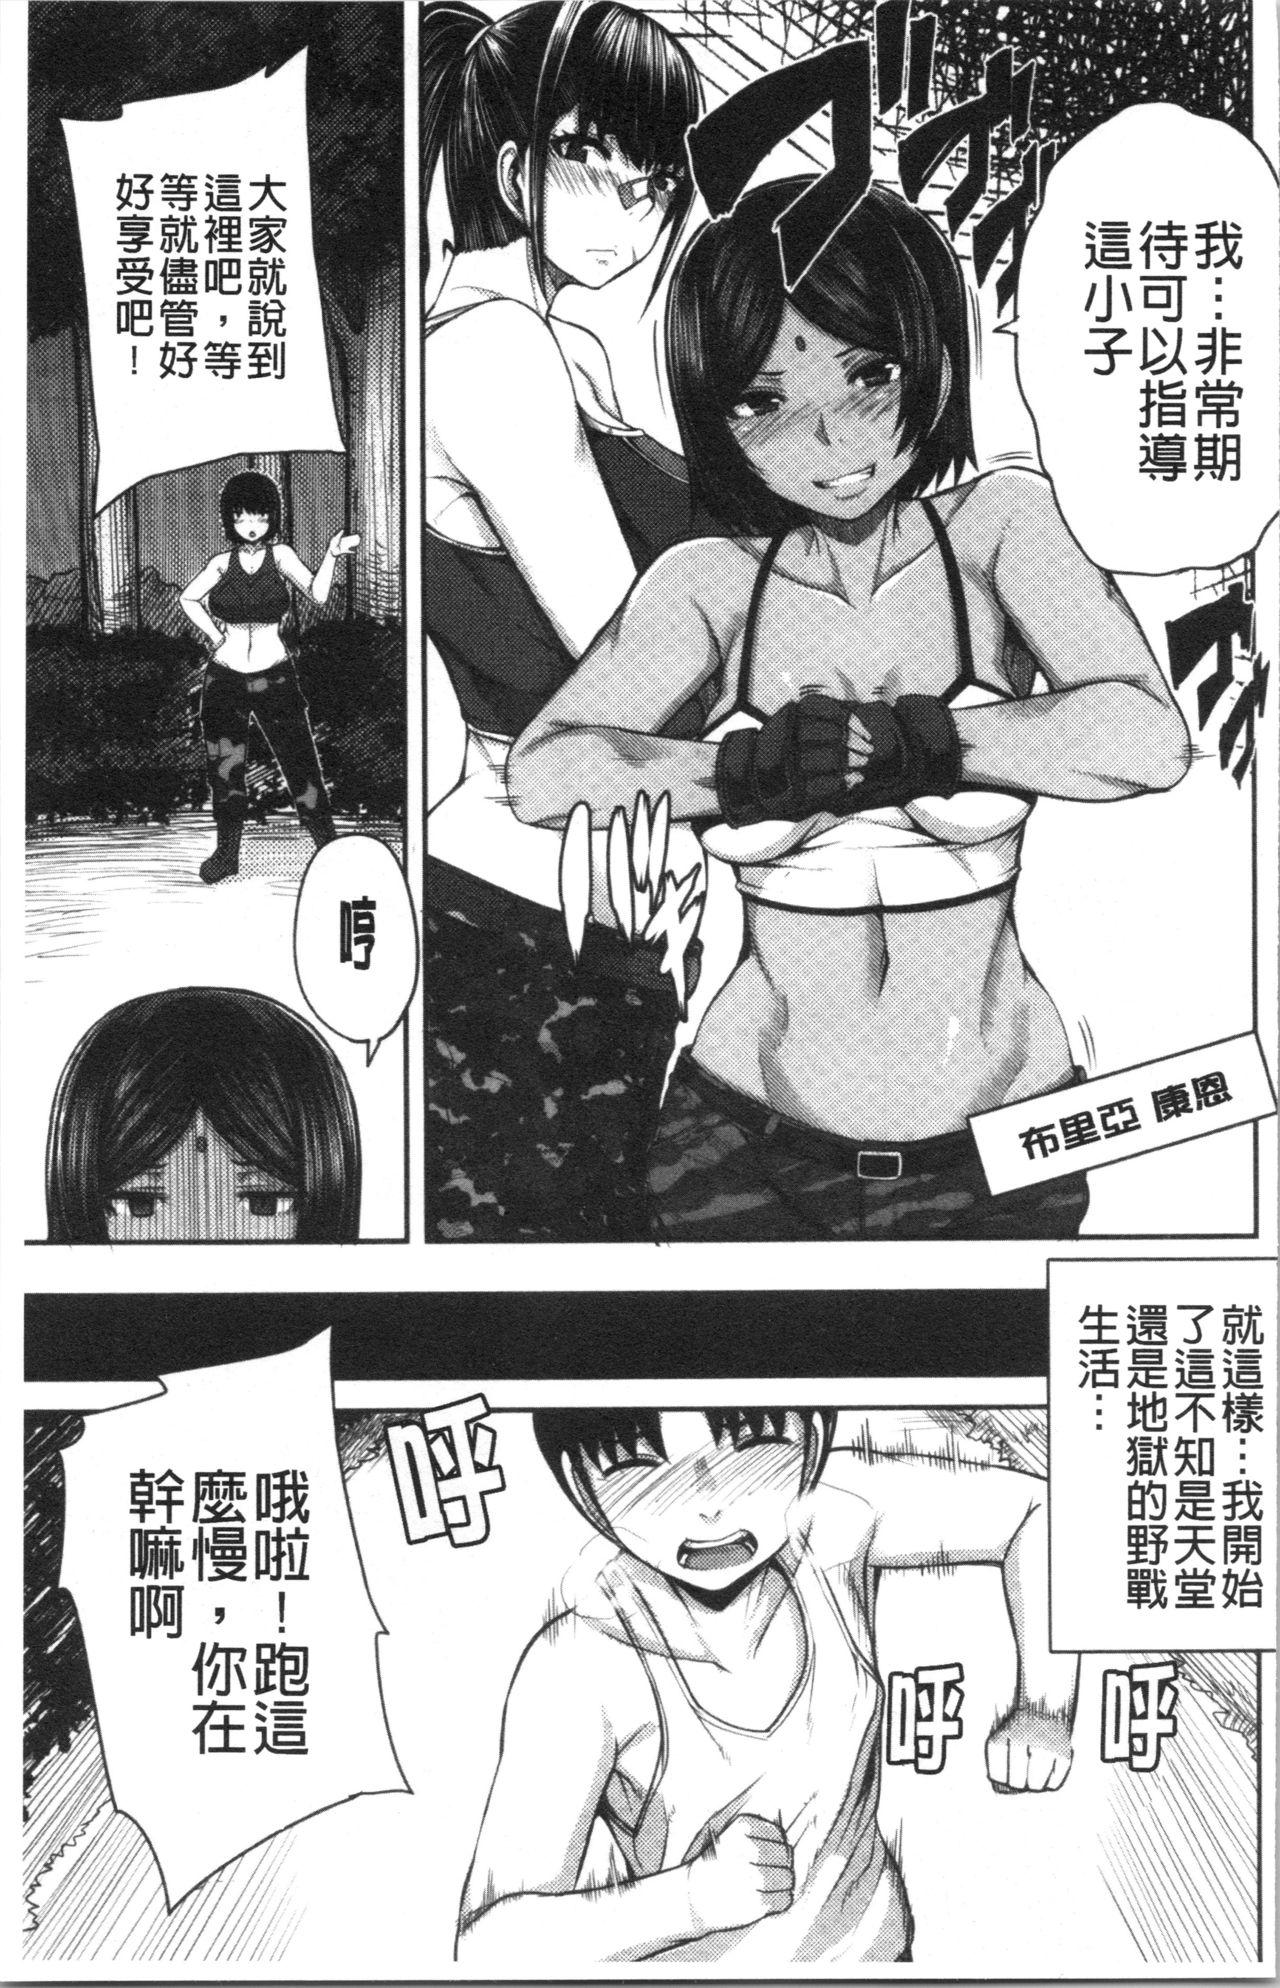 Bondagesex [Yutakame] Onee-chan BOOT CAMP ni Youkoso! - Sister’s Boot Camp [Chinese] Shy - Page 11